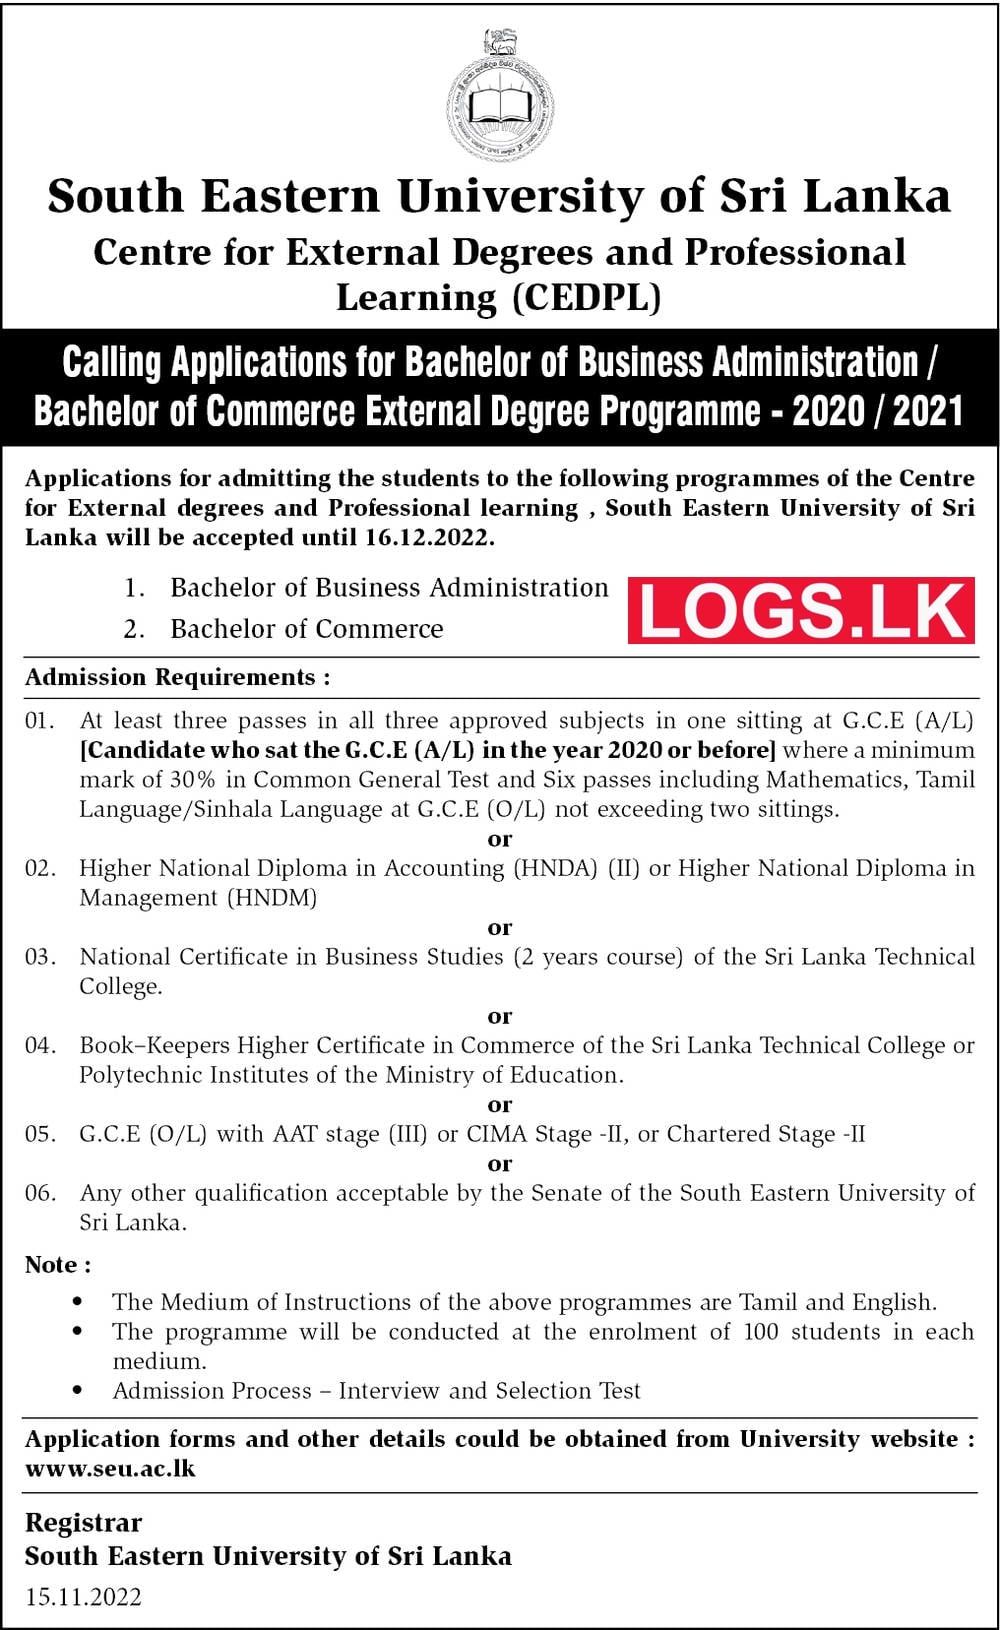 Bachelor of Business Administration - 2020 / 2021 - South Eastern University BBA Degree Application